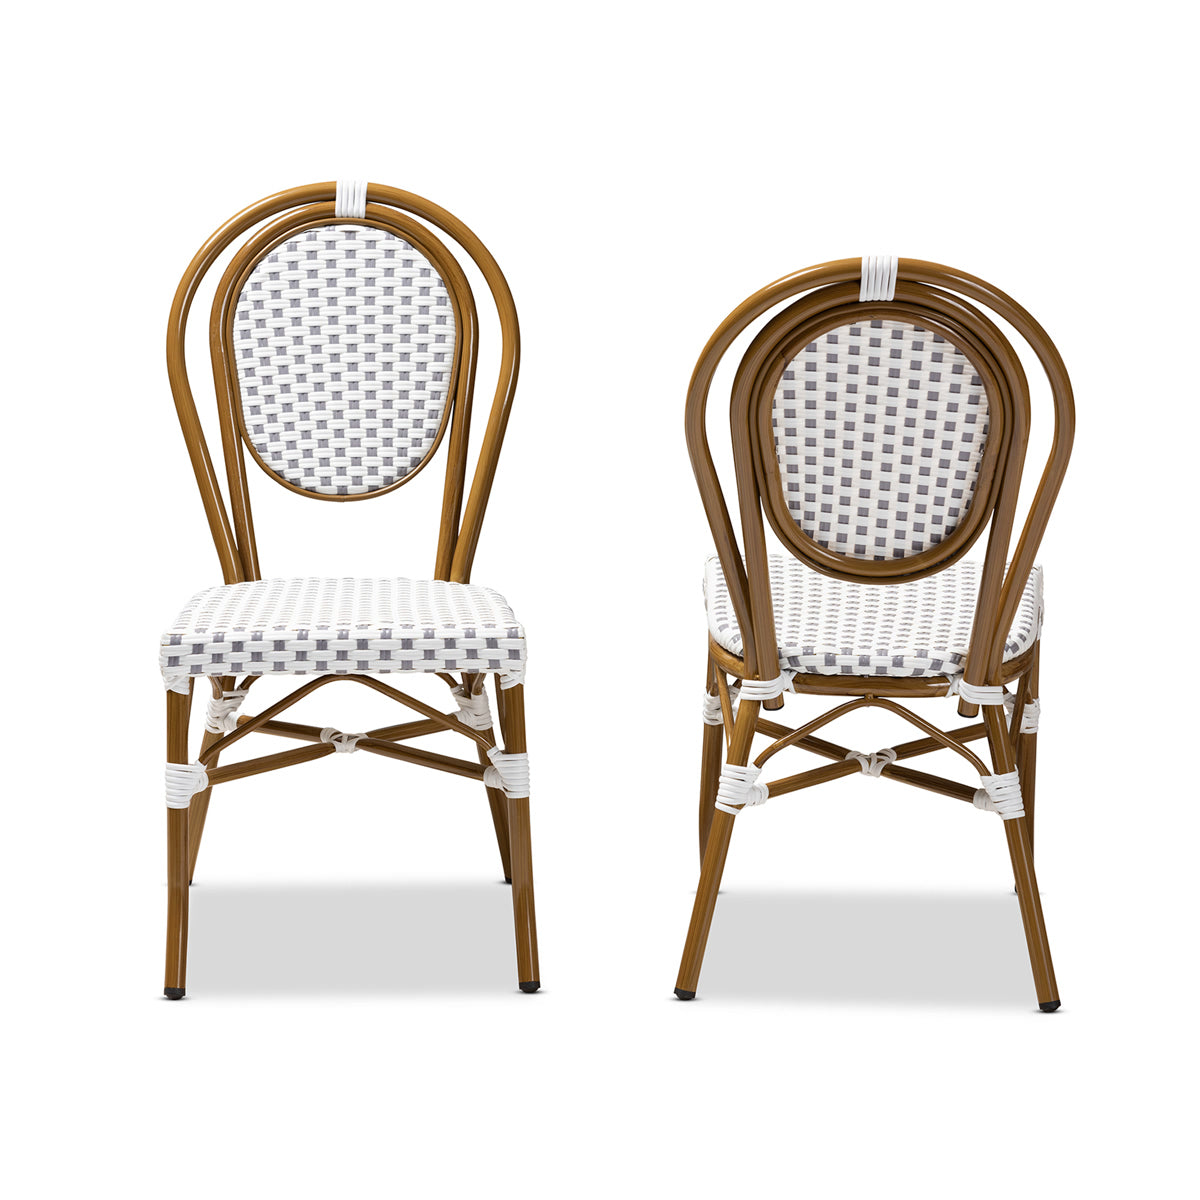 Baxton Studio Gauthier Classic French Indoor and Outdoor Grey and White Bamboo Style Stackable Bistro Dining Chair Set of 2 Baxton Studio-dining chair-Minimal And Modern - 2